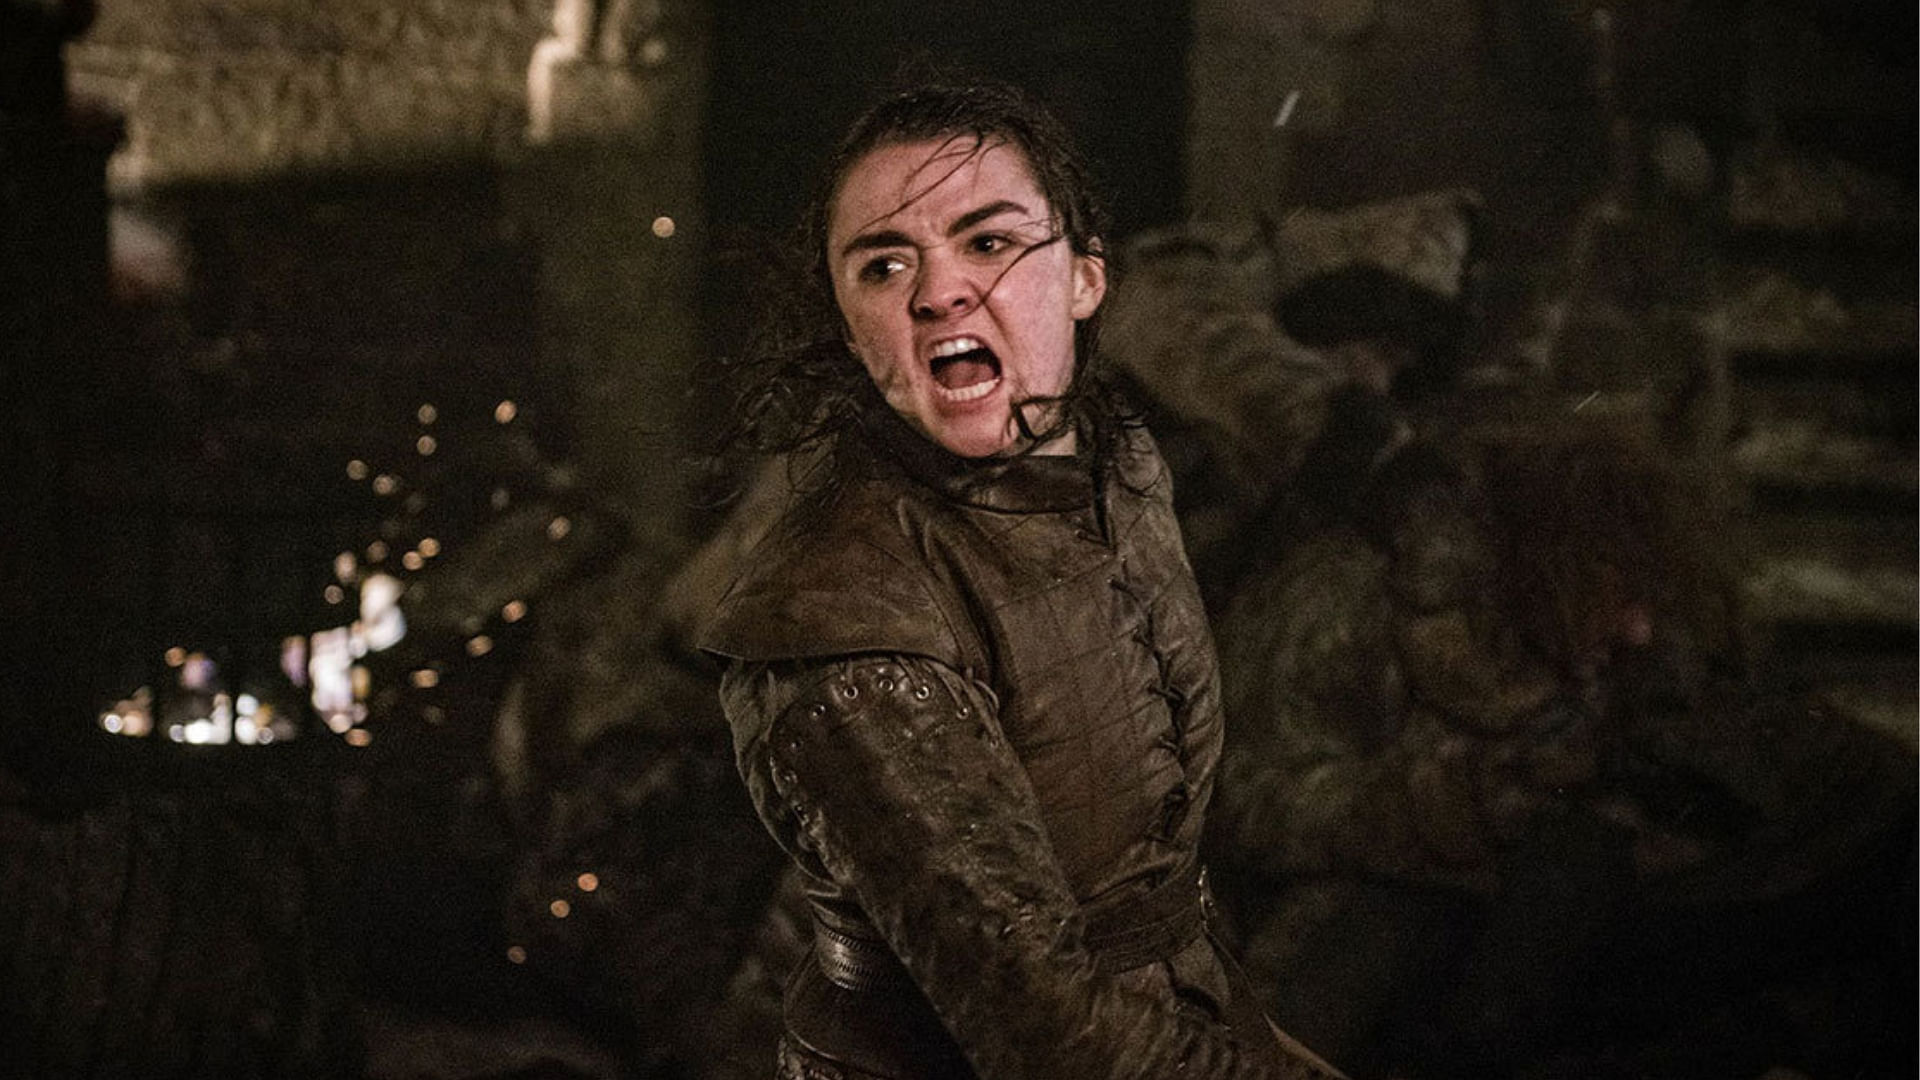 Maisie Williams as Arya Stark fighting it out in the Battle of Winterfell.